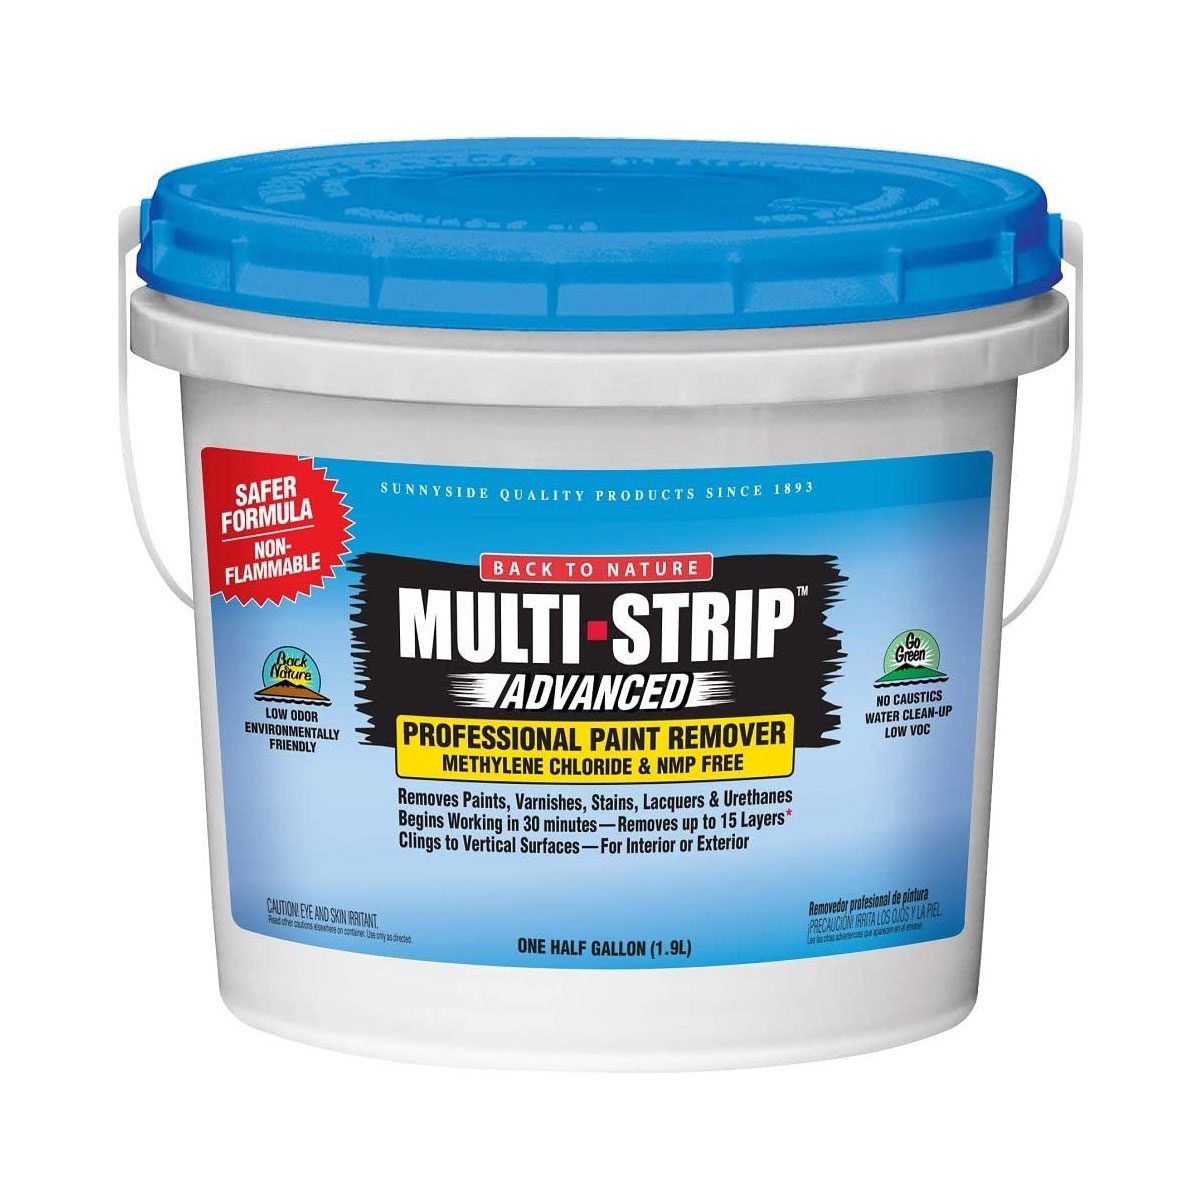 7 Best Paint Strippers for Wood, Metal, Concrete, Aluminum and More